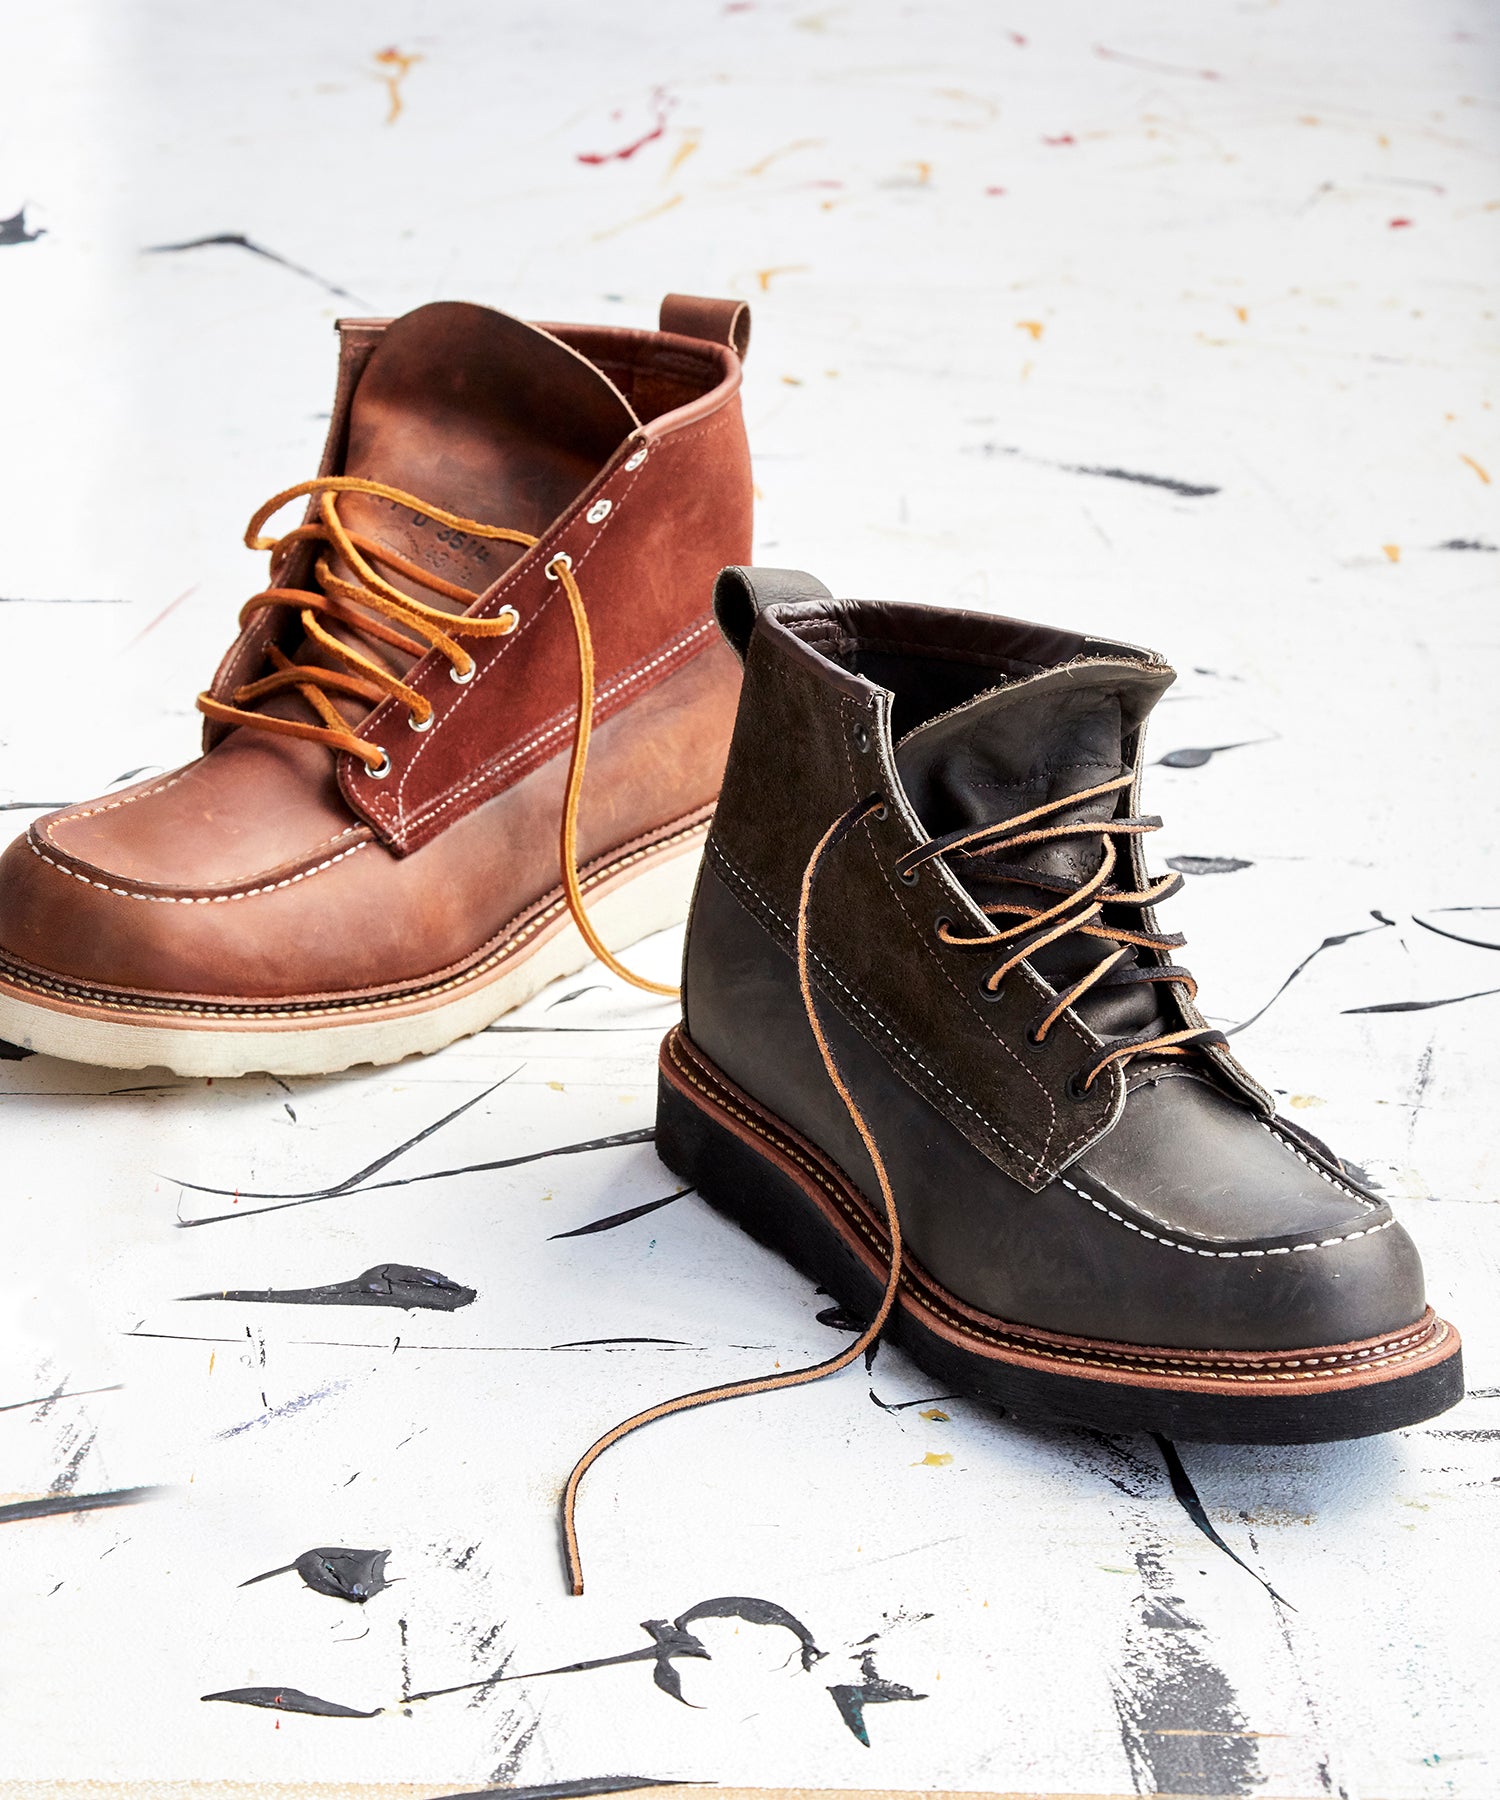 red wing moc toe sale